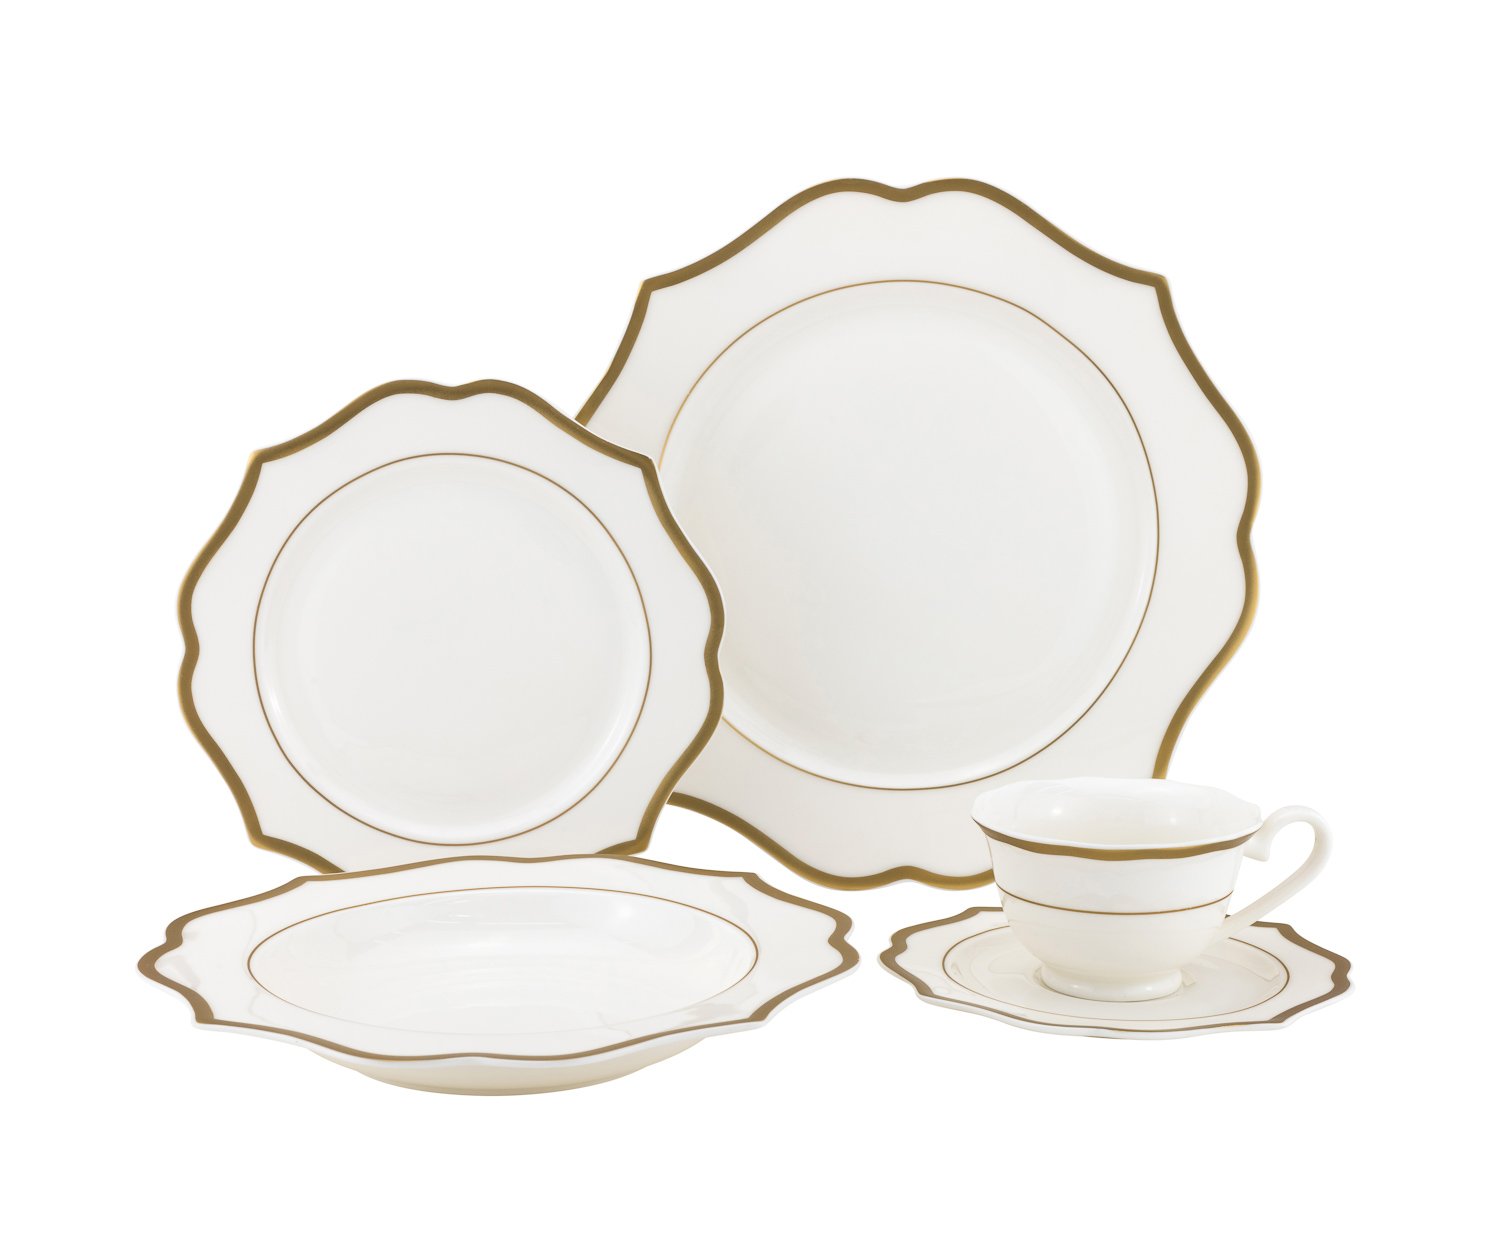 Joseph Sedgh Goldie-20 Service for 4 Bone China with Gold Rim, Includes 11" Dinner Plate, 8" Salad Plate, Soup Bowl, Teacup with Saucer